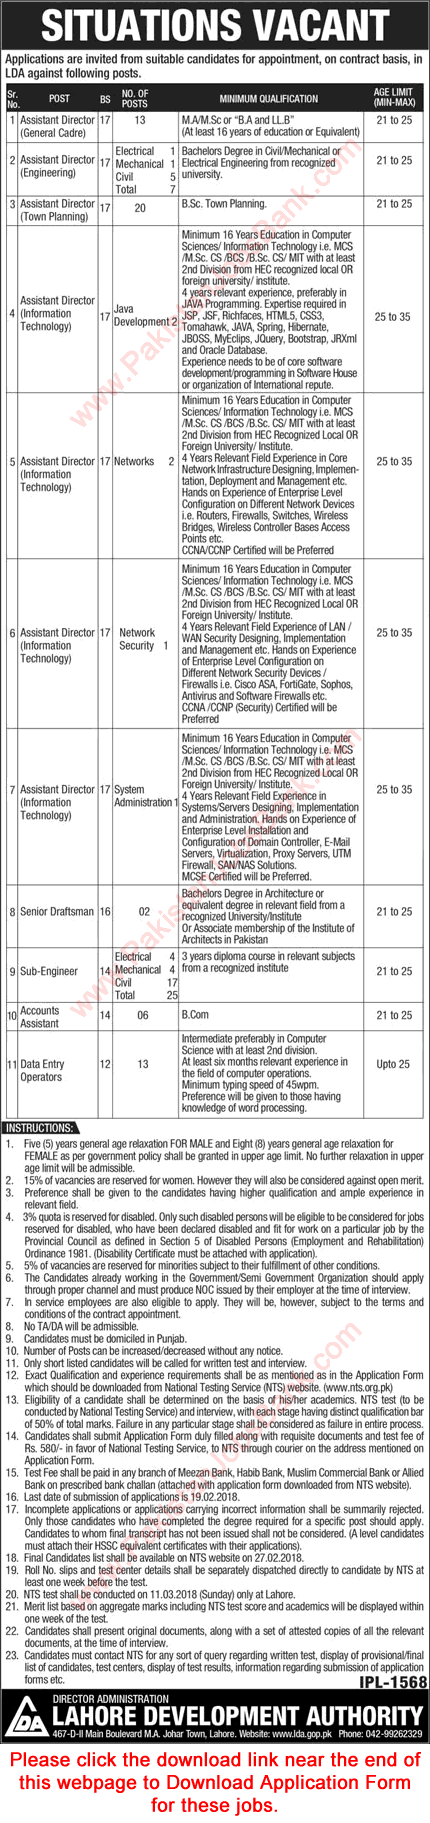 Lahore Development Authority Jobs February 2018 LDA NTS Application Form Sub Engineers, DEO & Others Latest